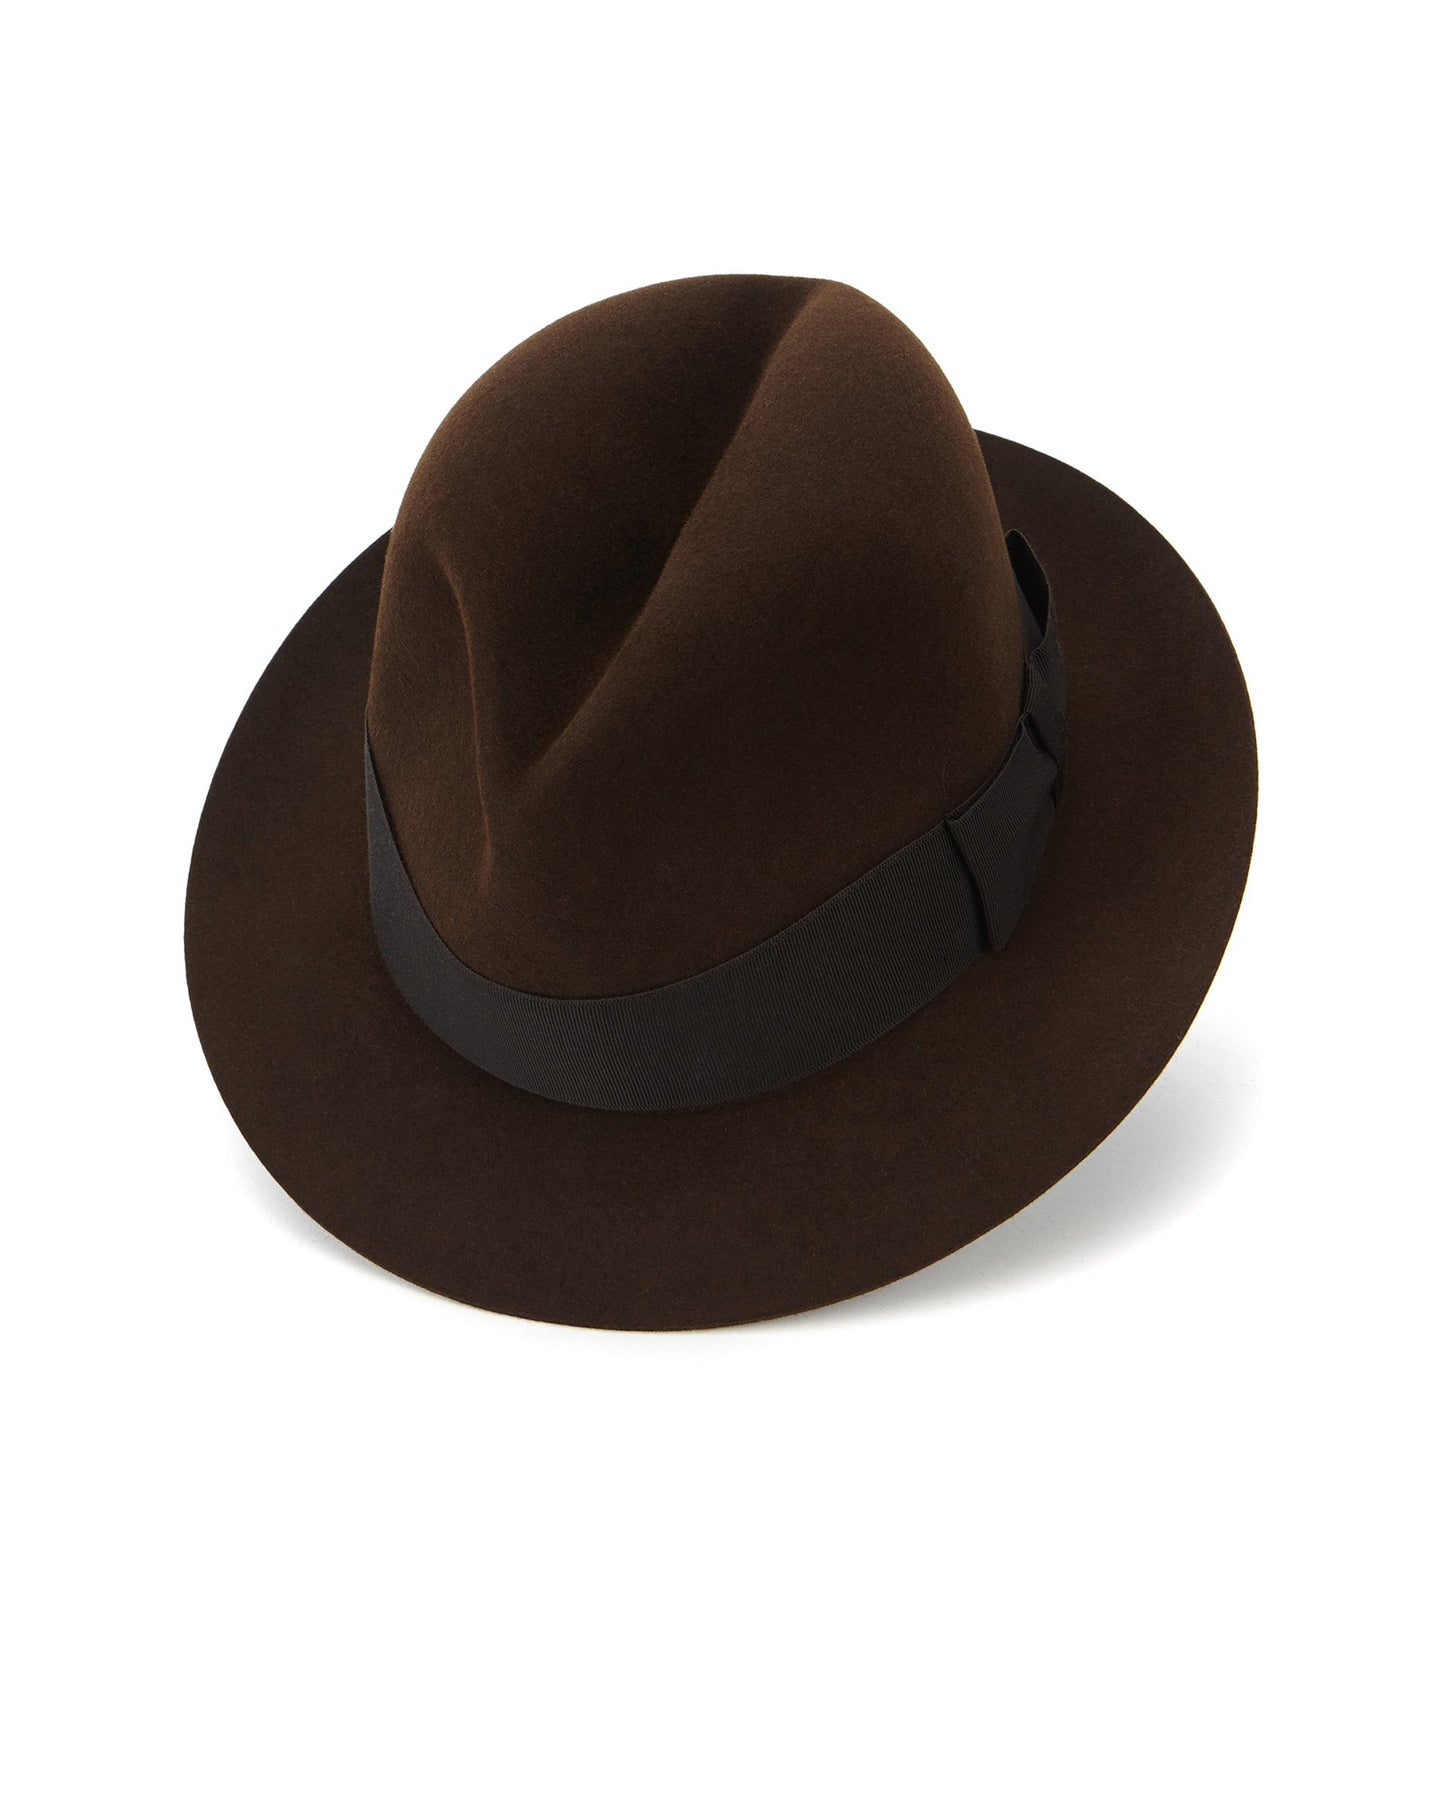 LOCK HATTERS Madison Trilby